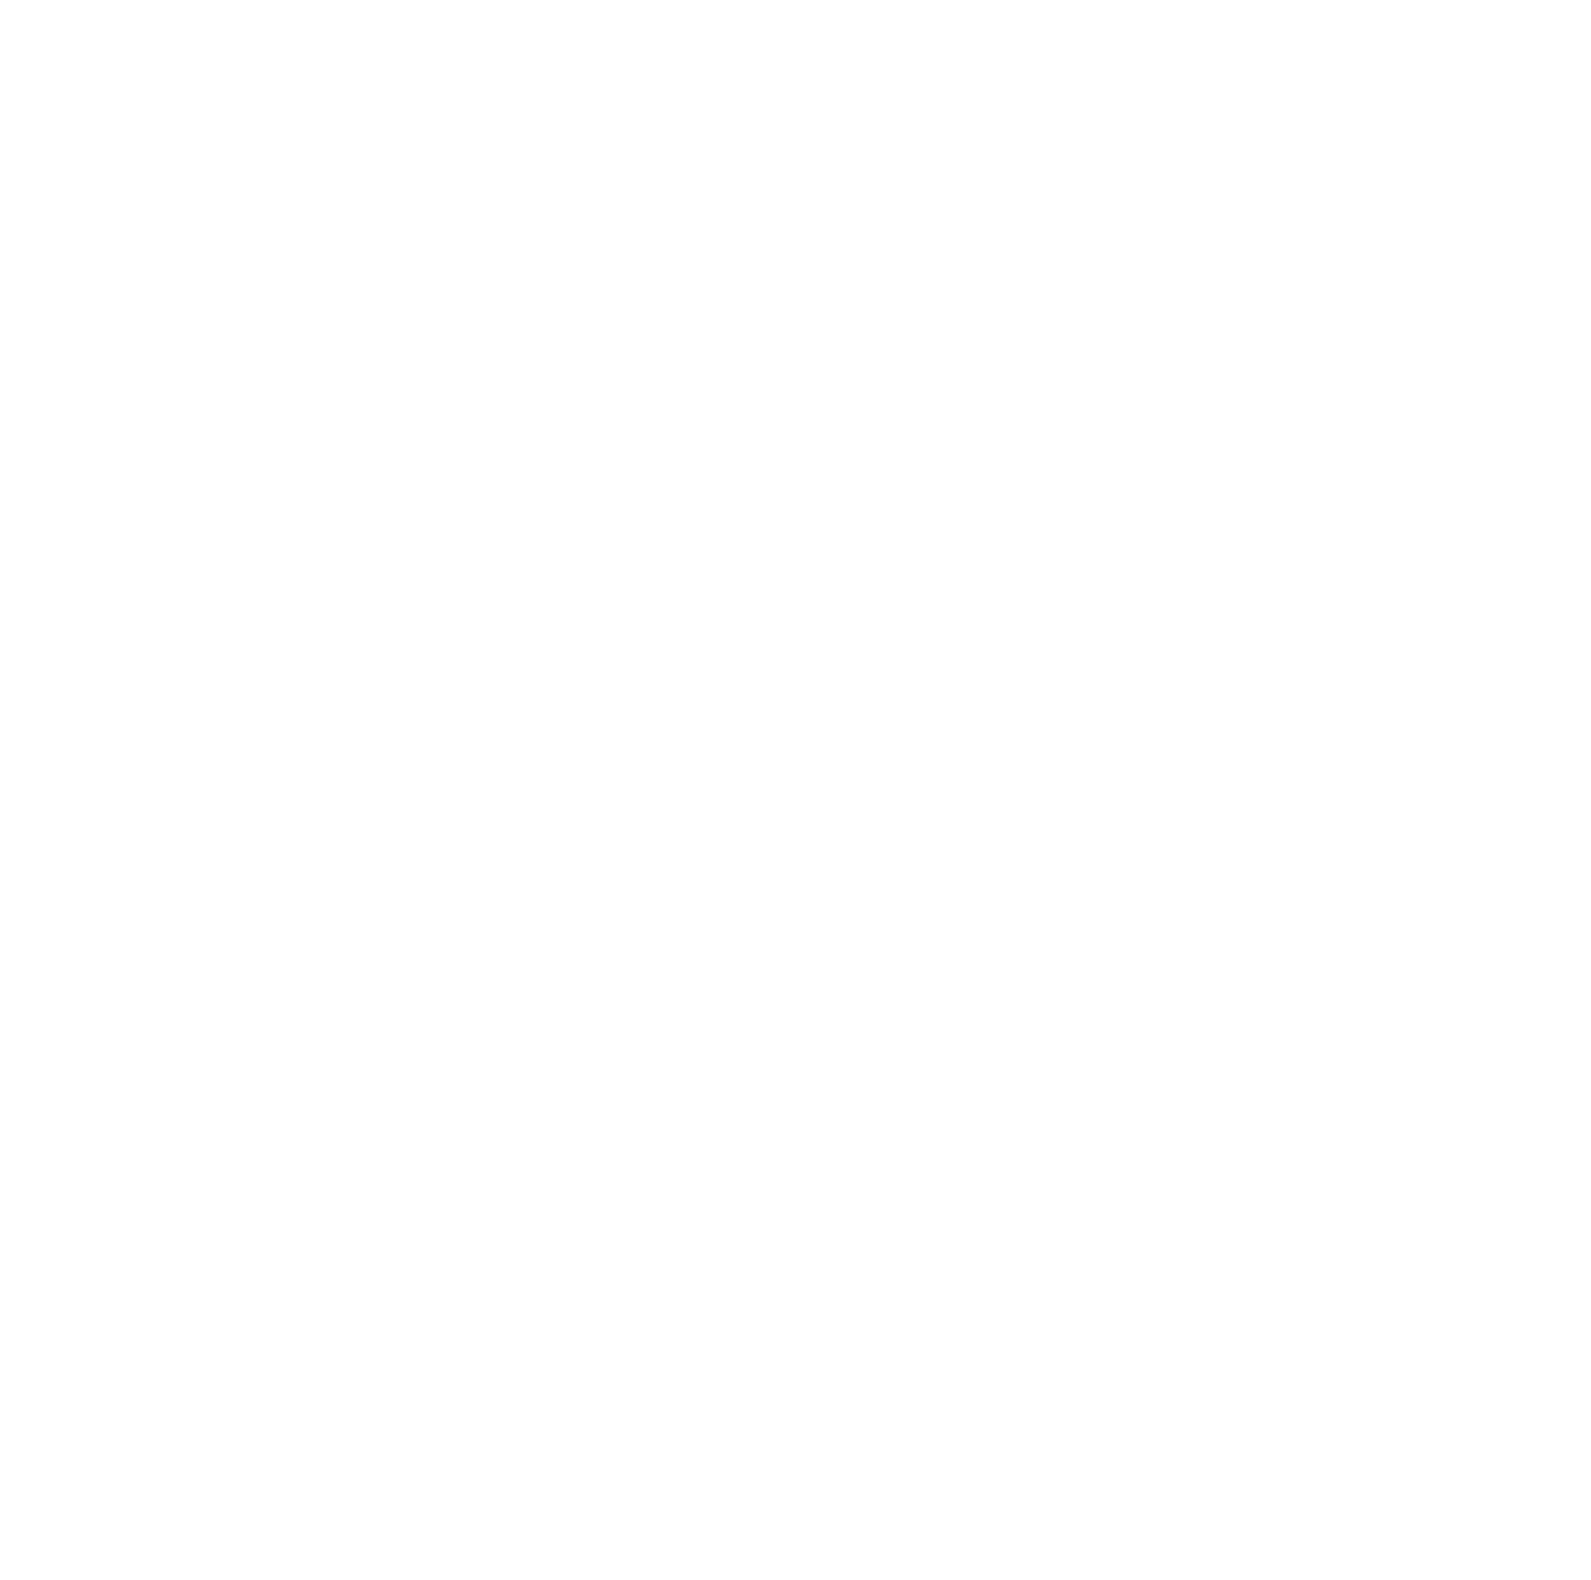 WorkMagic - A Business Technology Consulting Firm